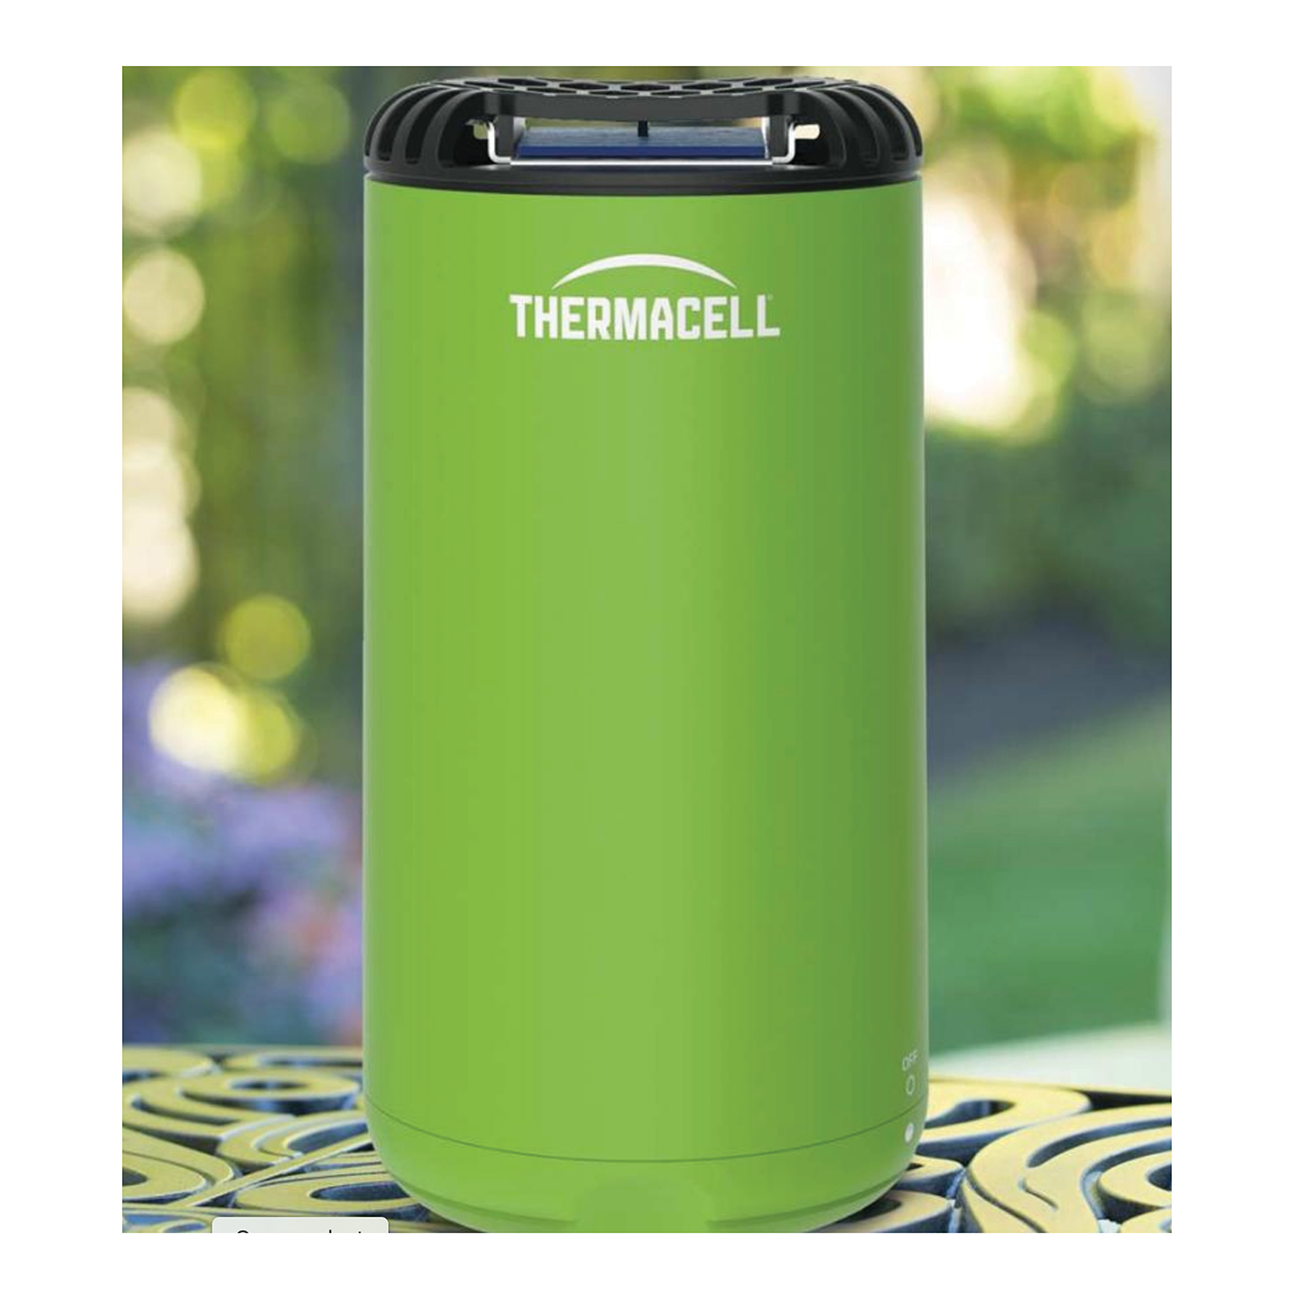 Thermacell - Mosquito / Midge Protection